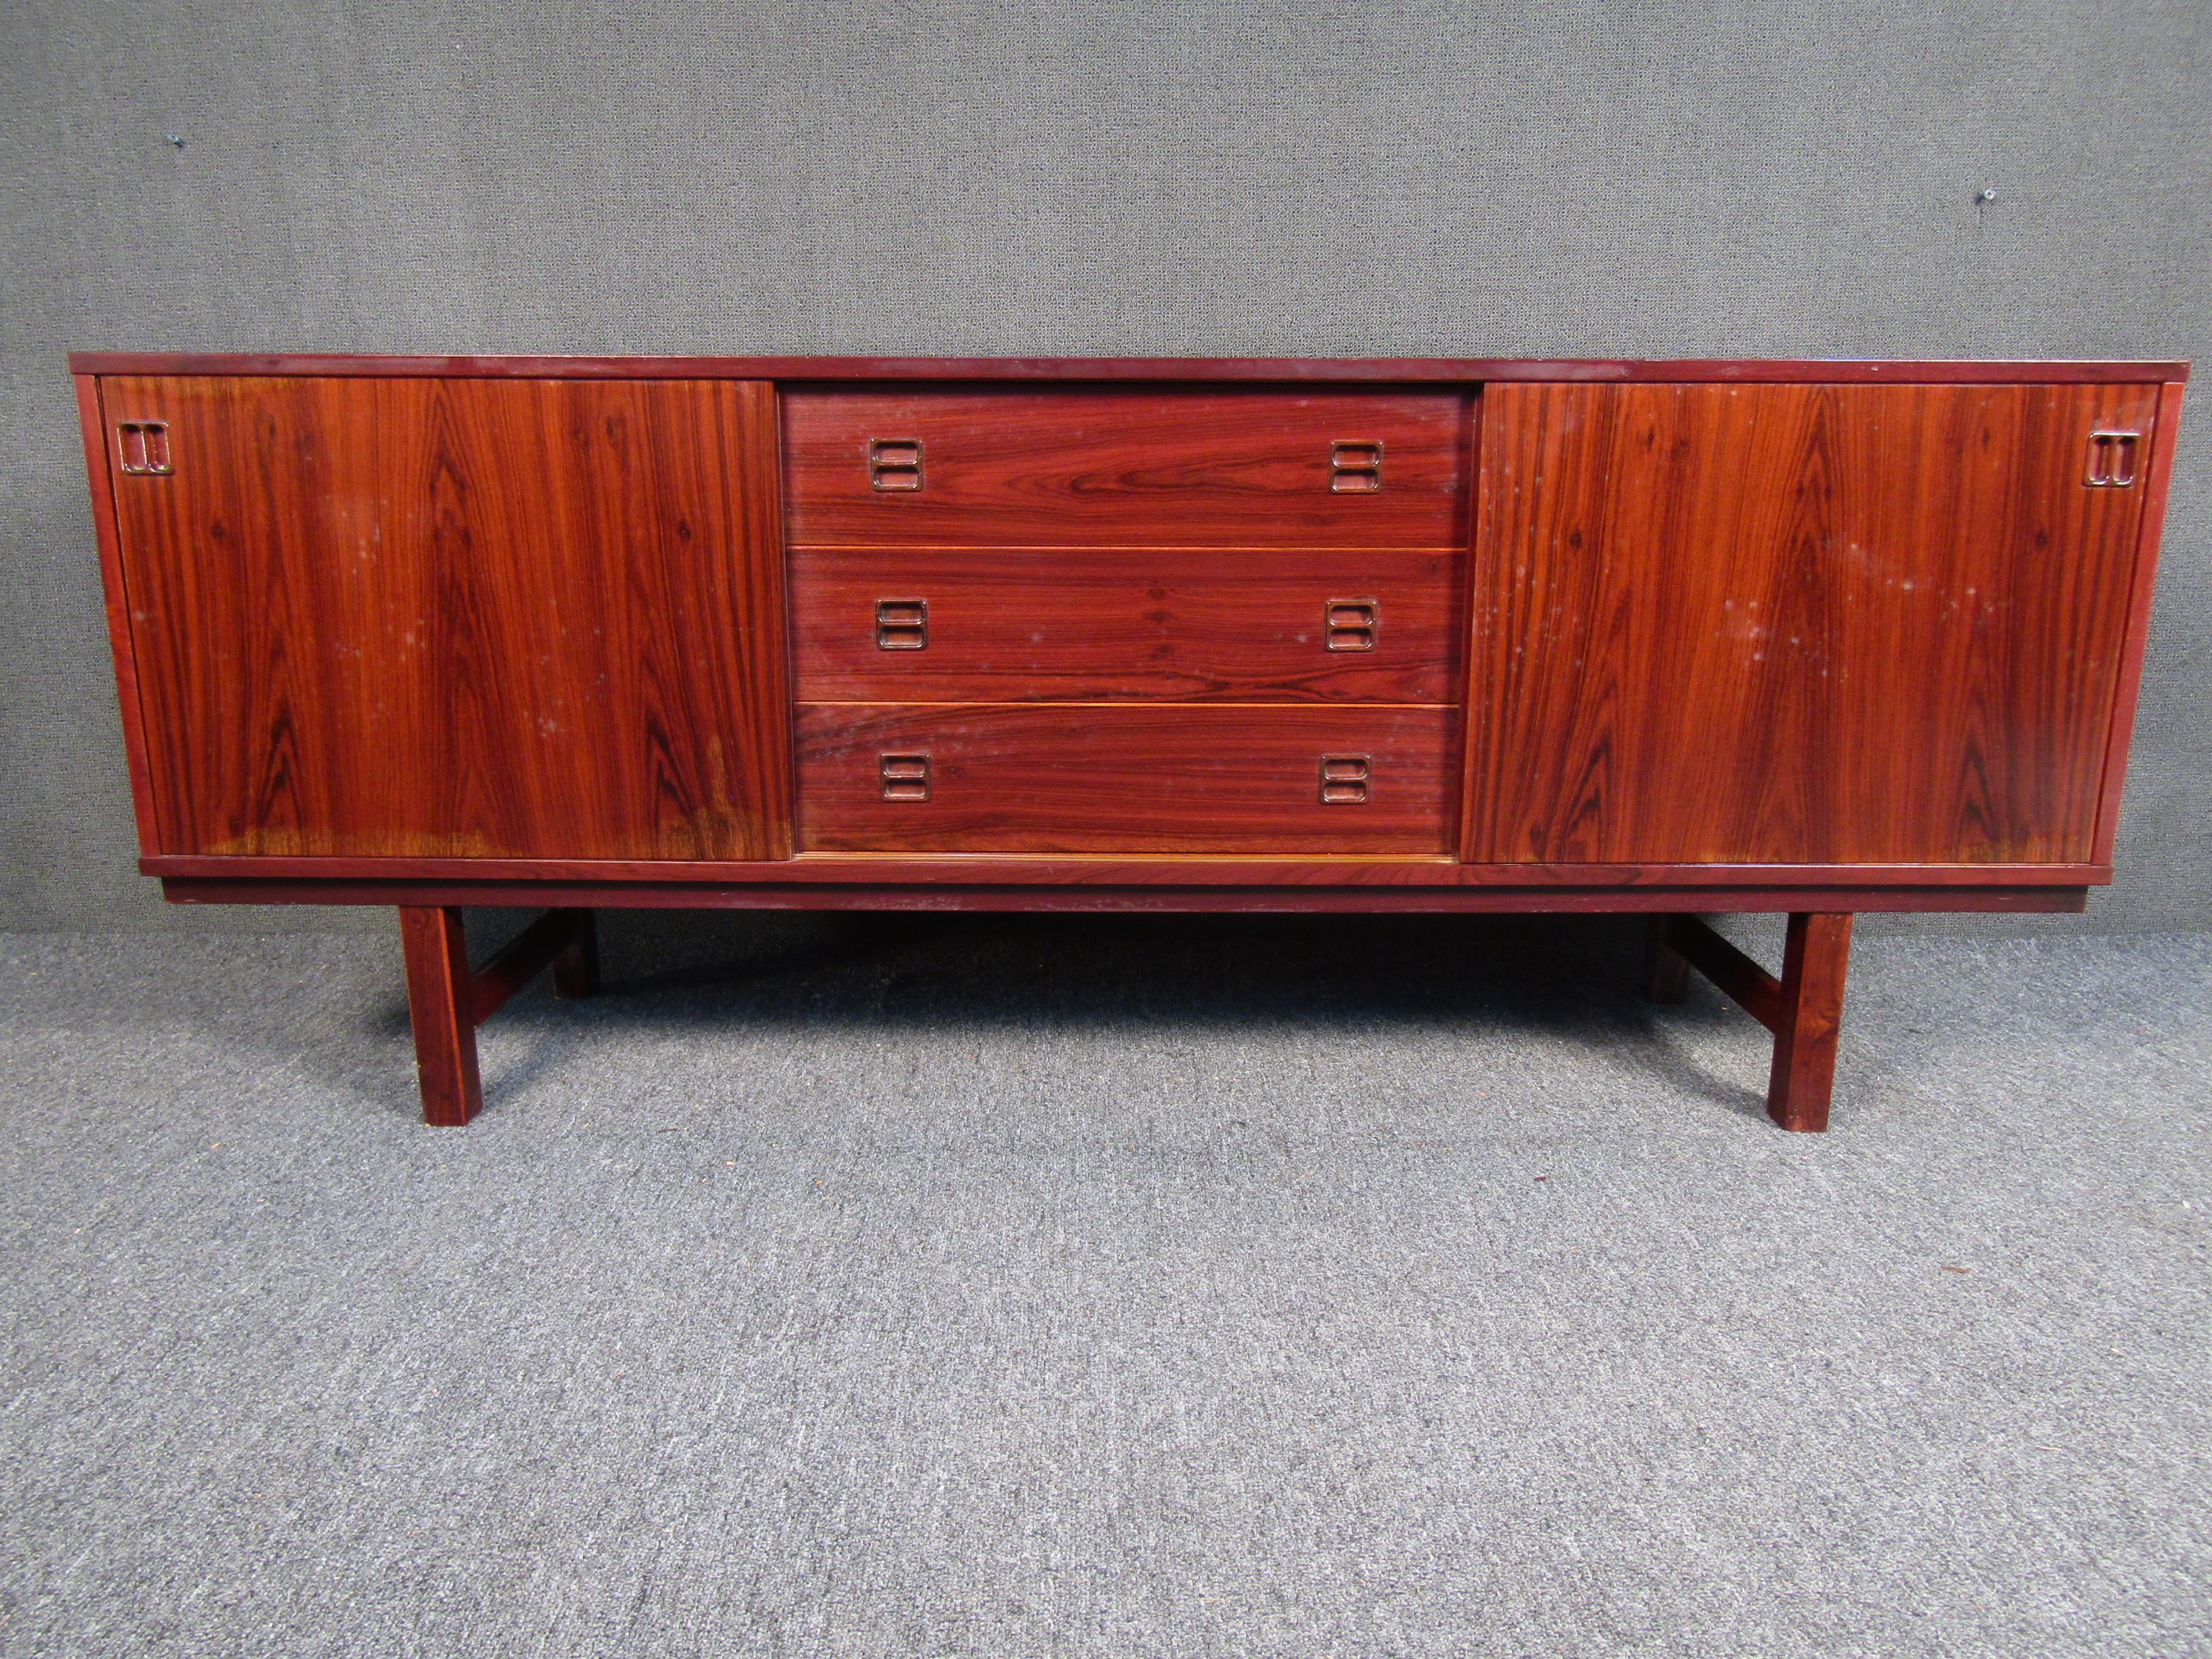 A stunning Mid-Century Modern Danish rosewood credenza. A unique dresser with sliding doors and 3 drawers for optimum storage. Its sleek design is perfect for any home/office/bedroom setting. 

Please confirm pickup location with seller (NY/NJ).